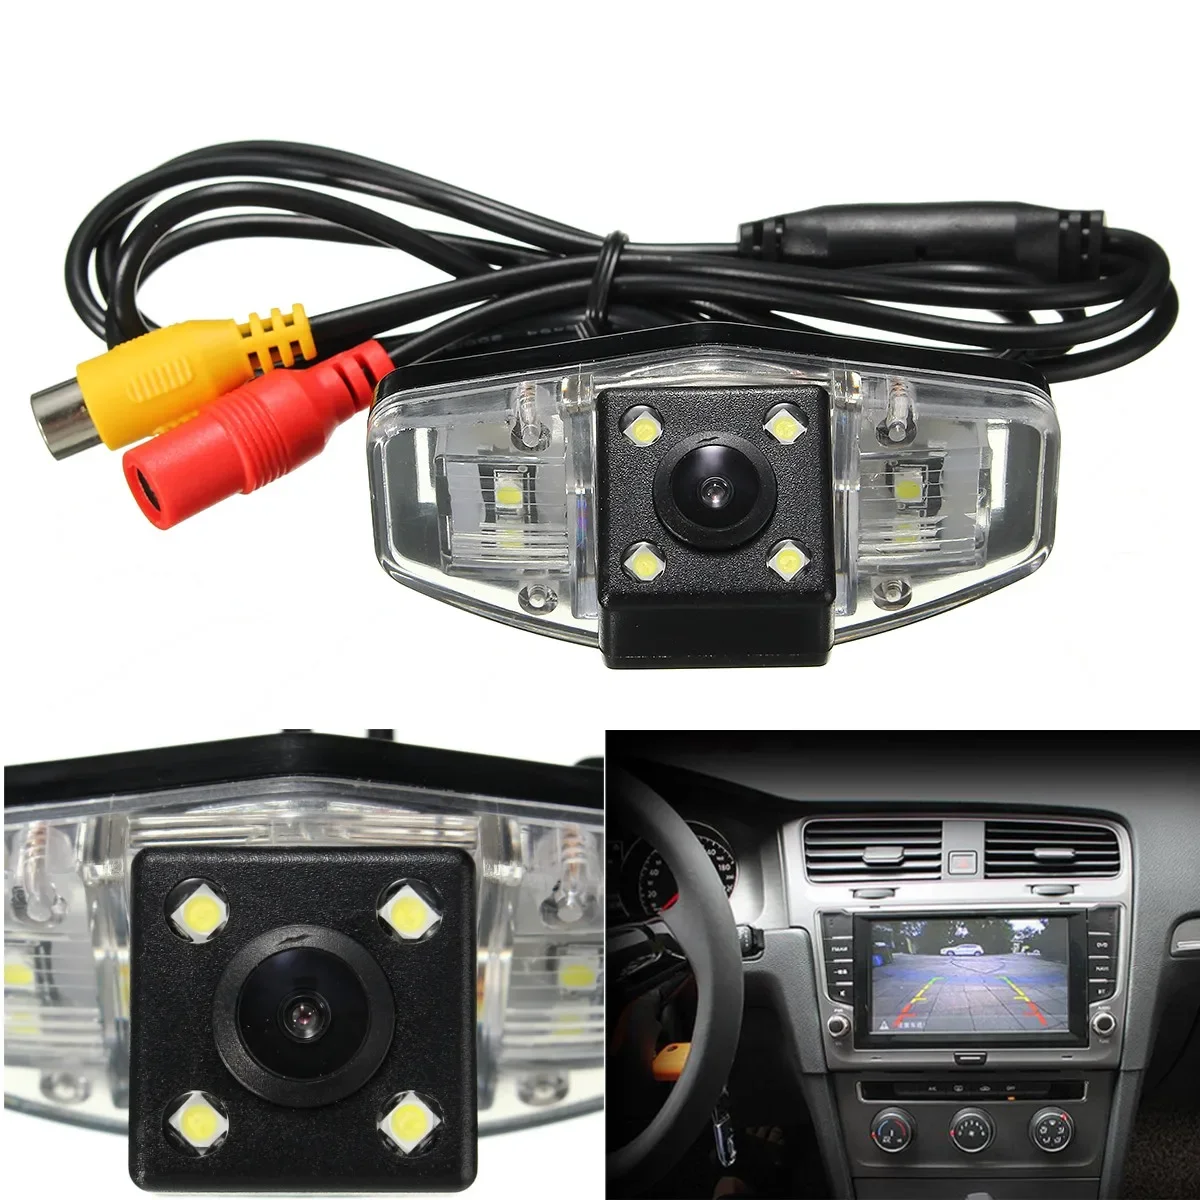 

120 Degree CCD Car Reverse Back up Rear View Camera For Honda Accord Pilot Civic EK FD Odyssey Acura TSX Car Accessories